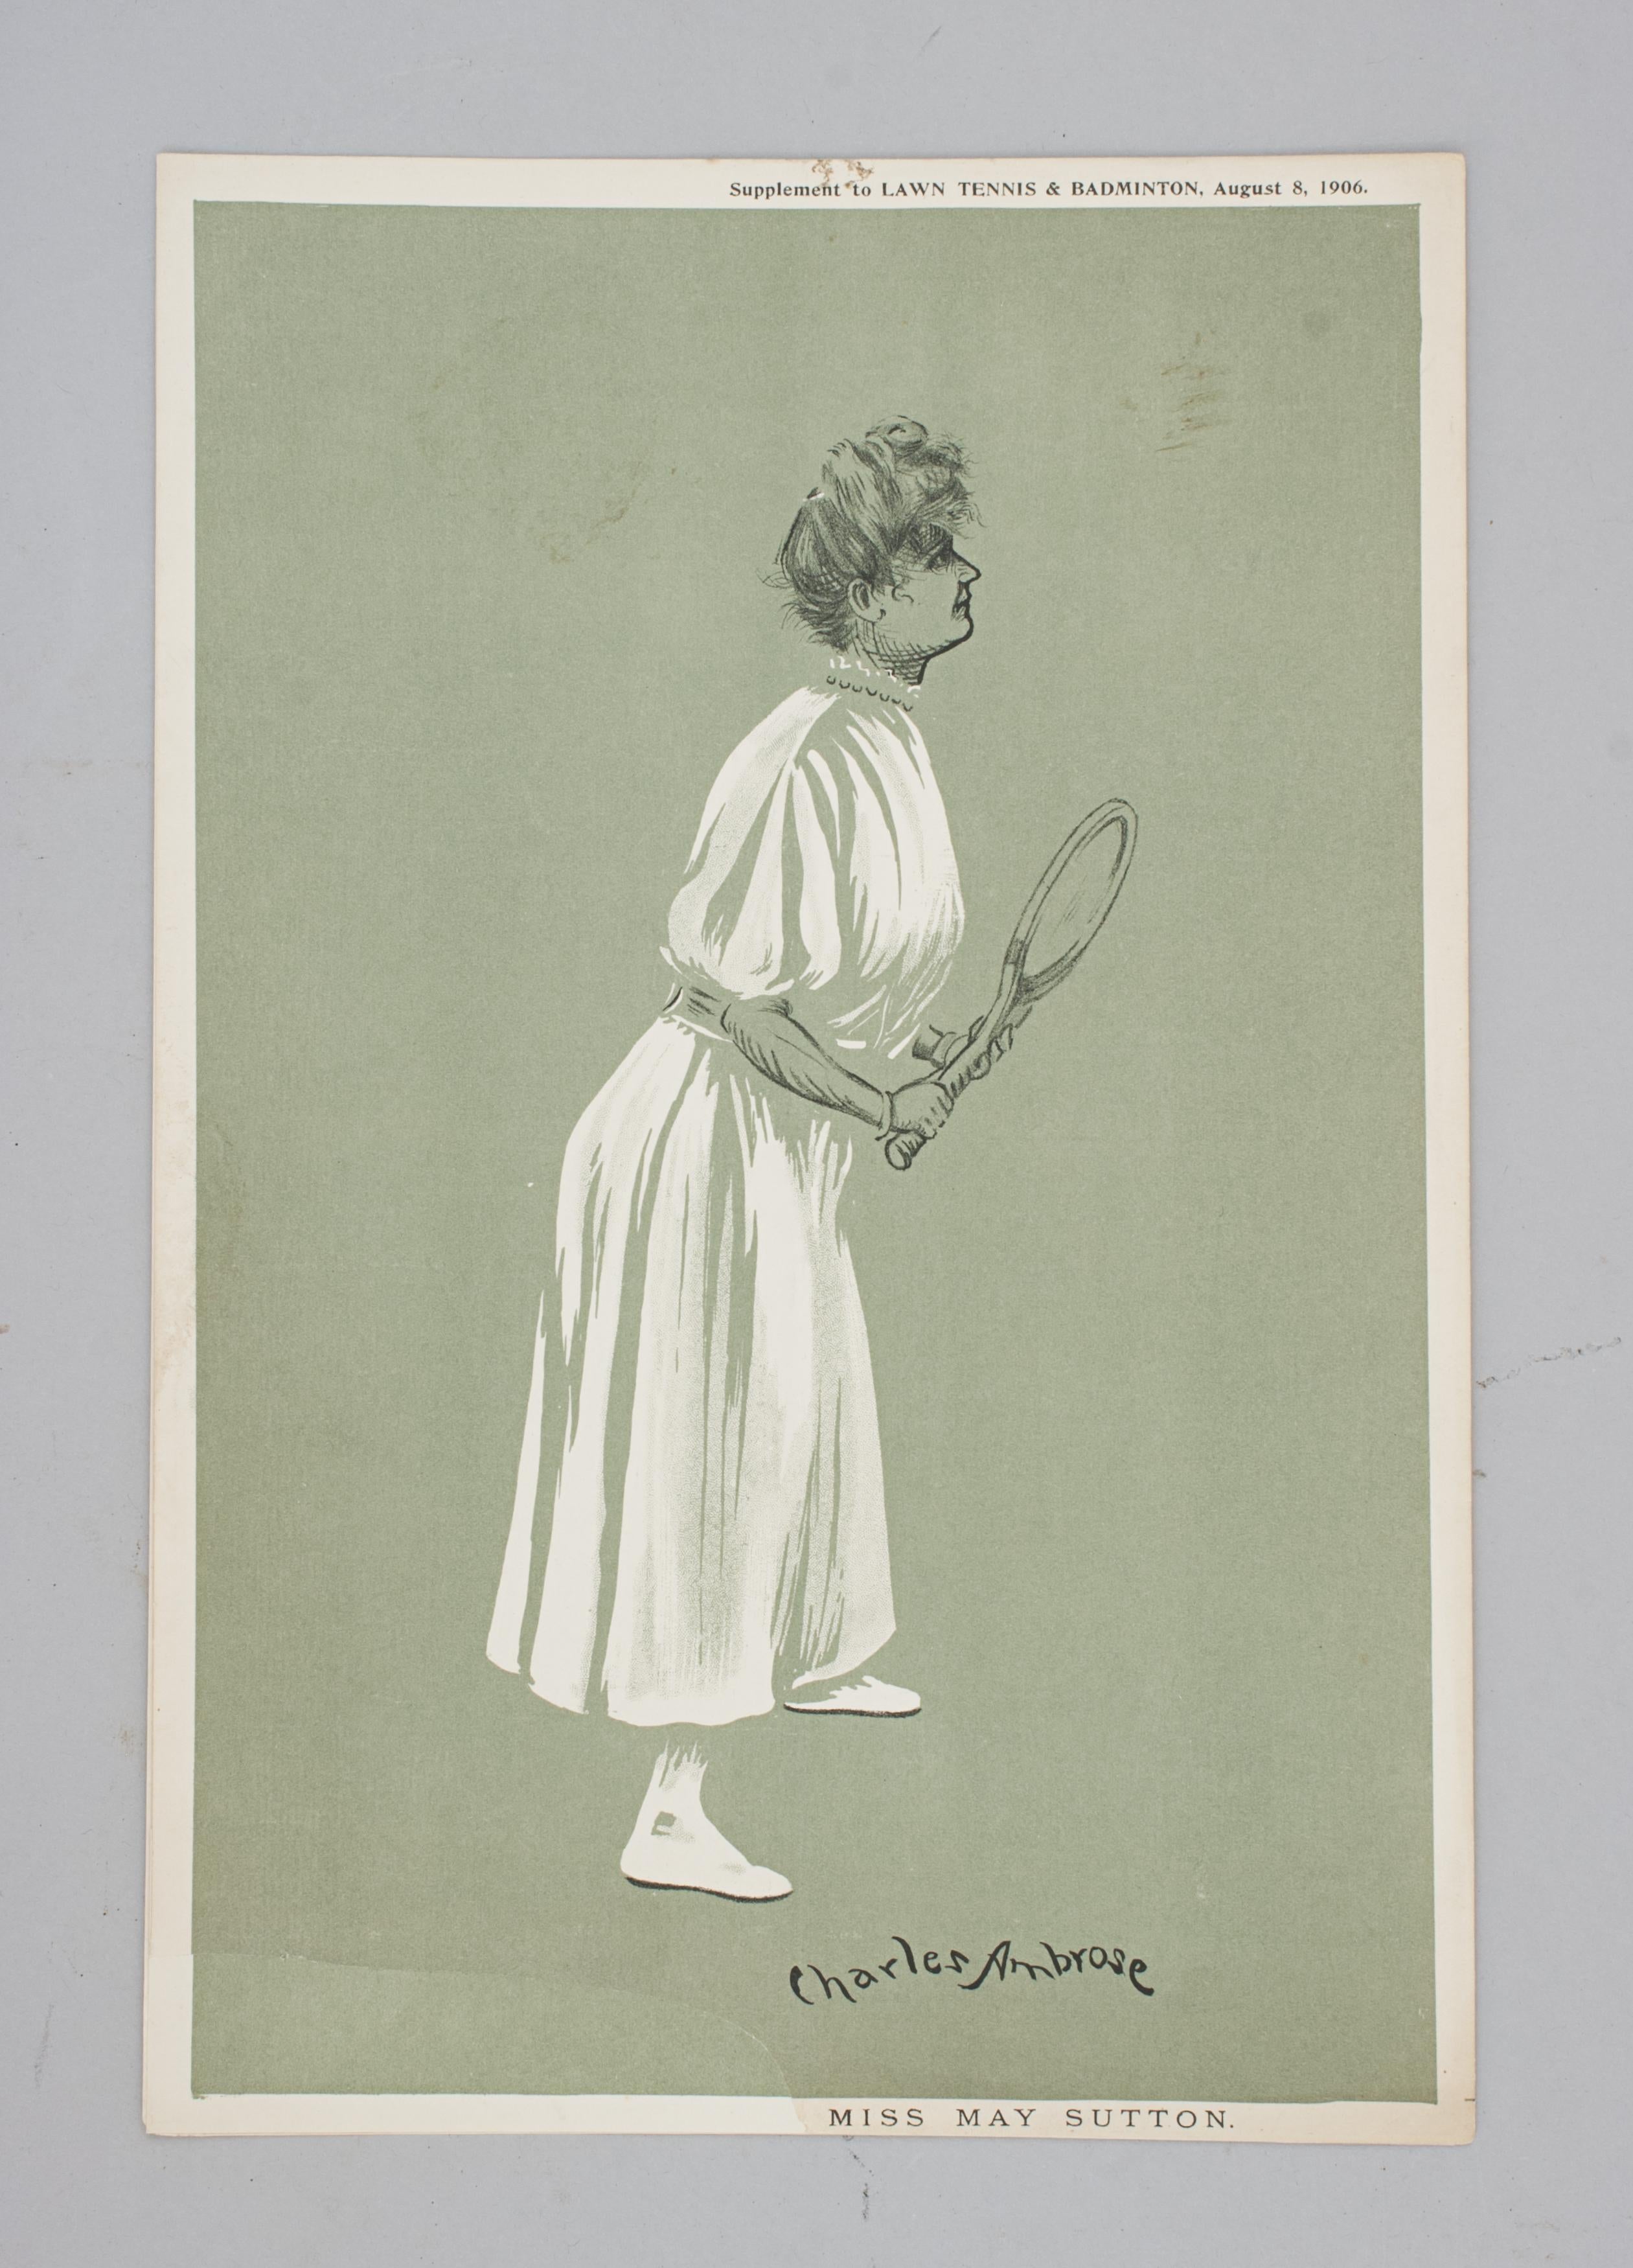 Collection of Ten Tennis Prints by Charles Ambrose For Sale 1